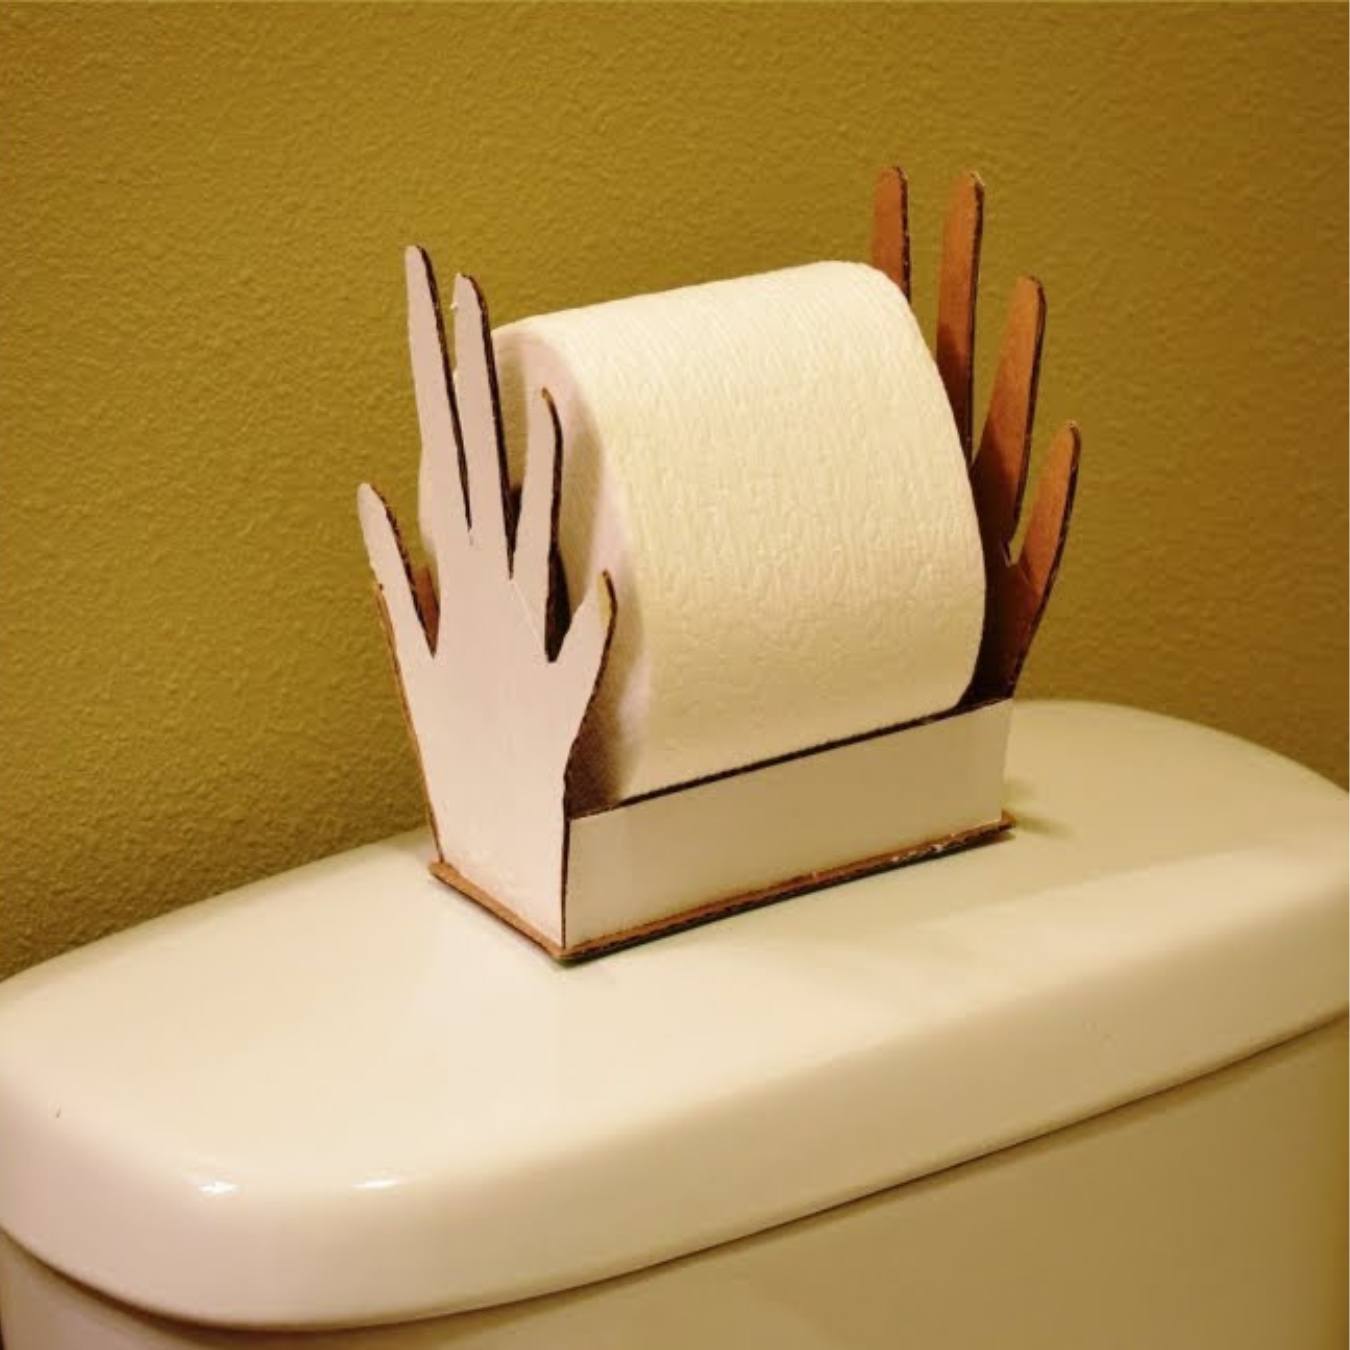 How To Make A Toilet Paper Holder Out Of Cardboard